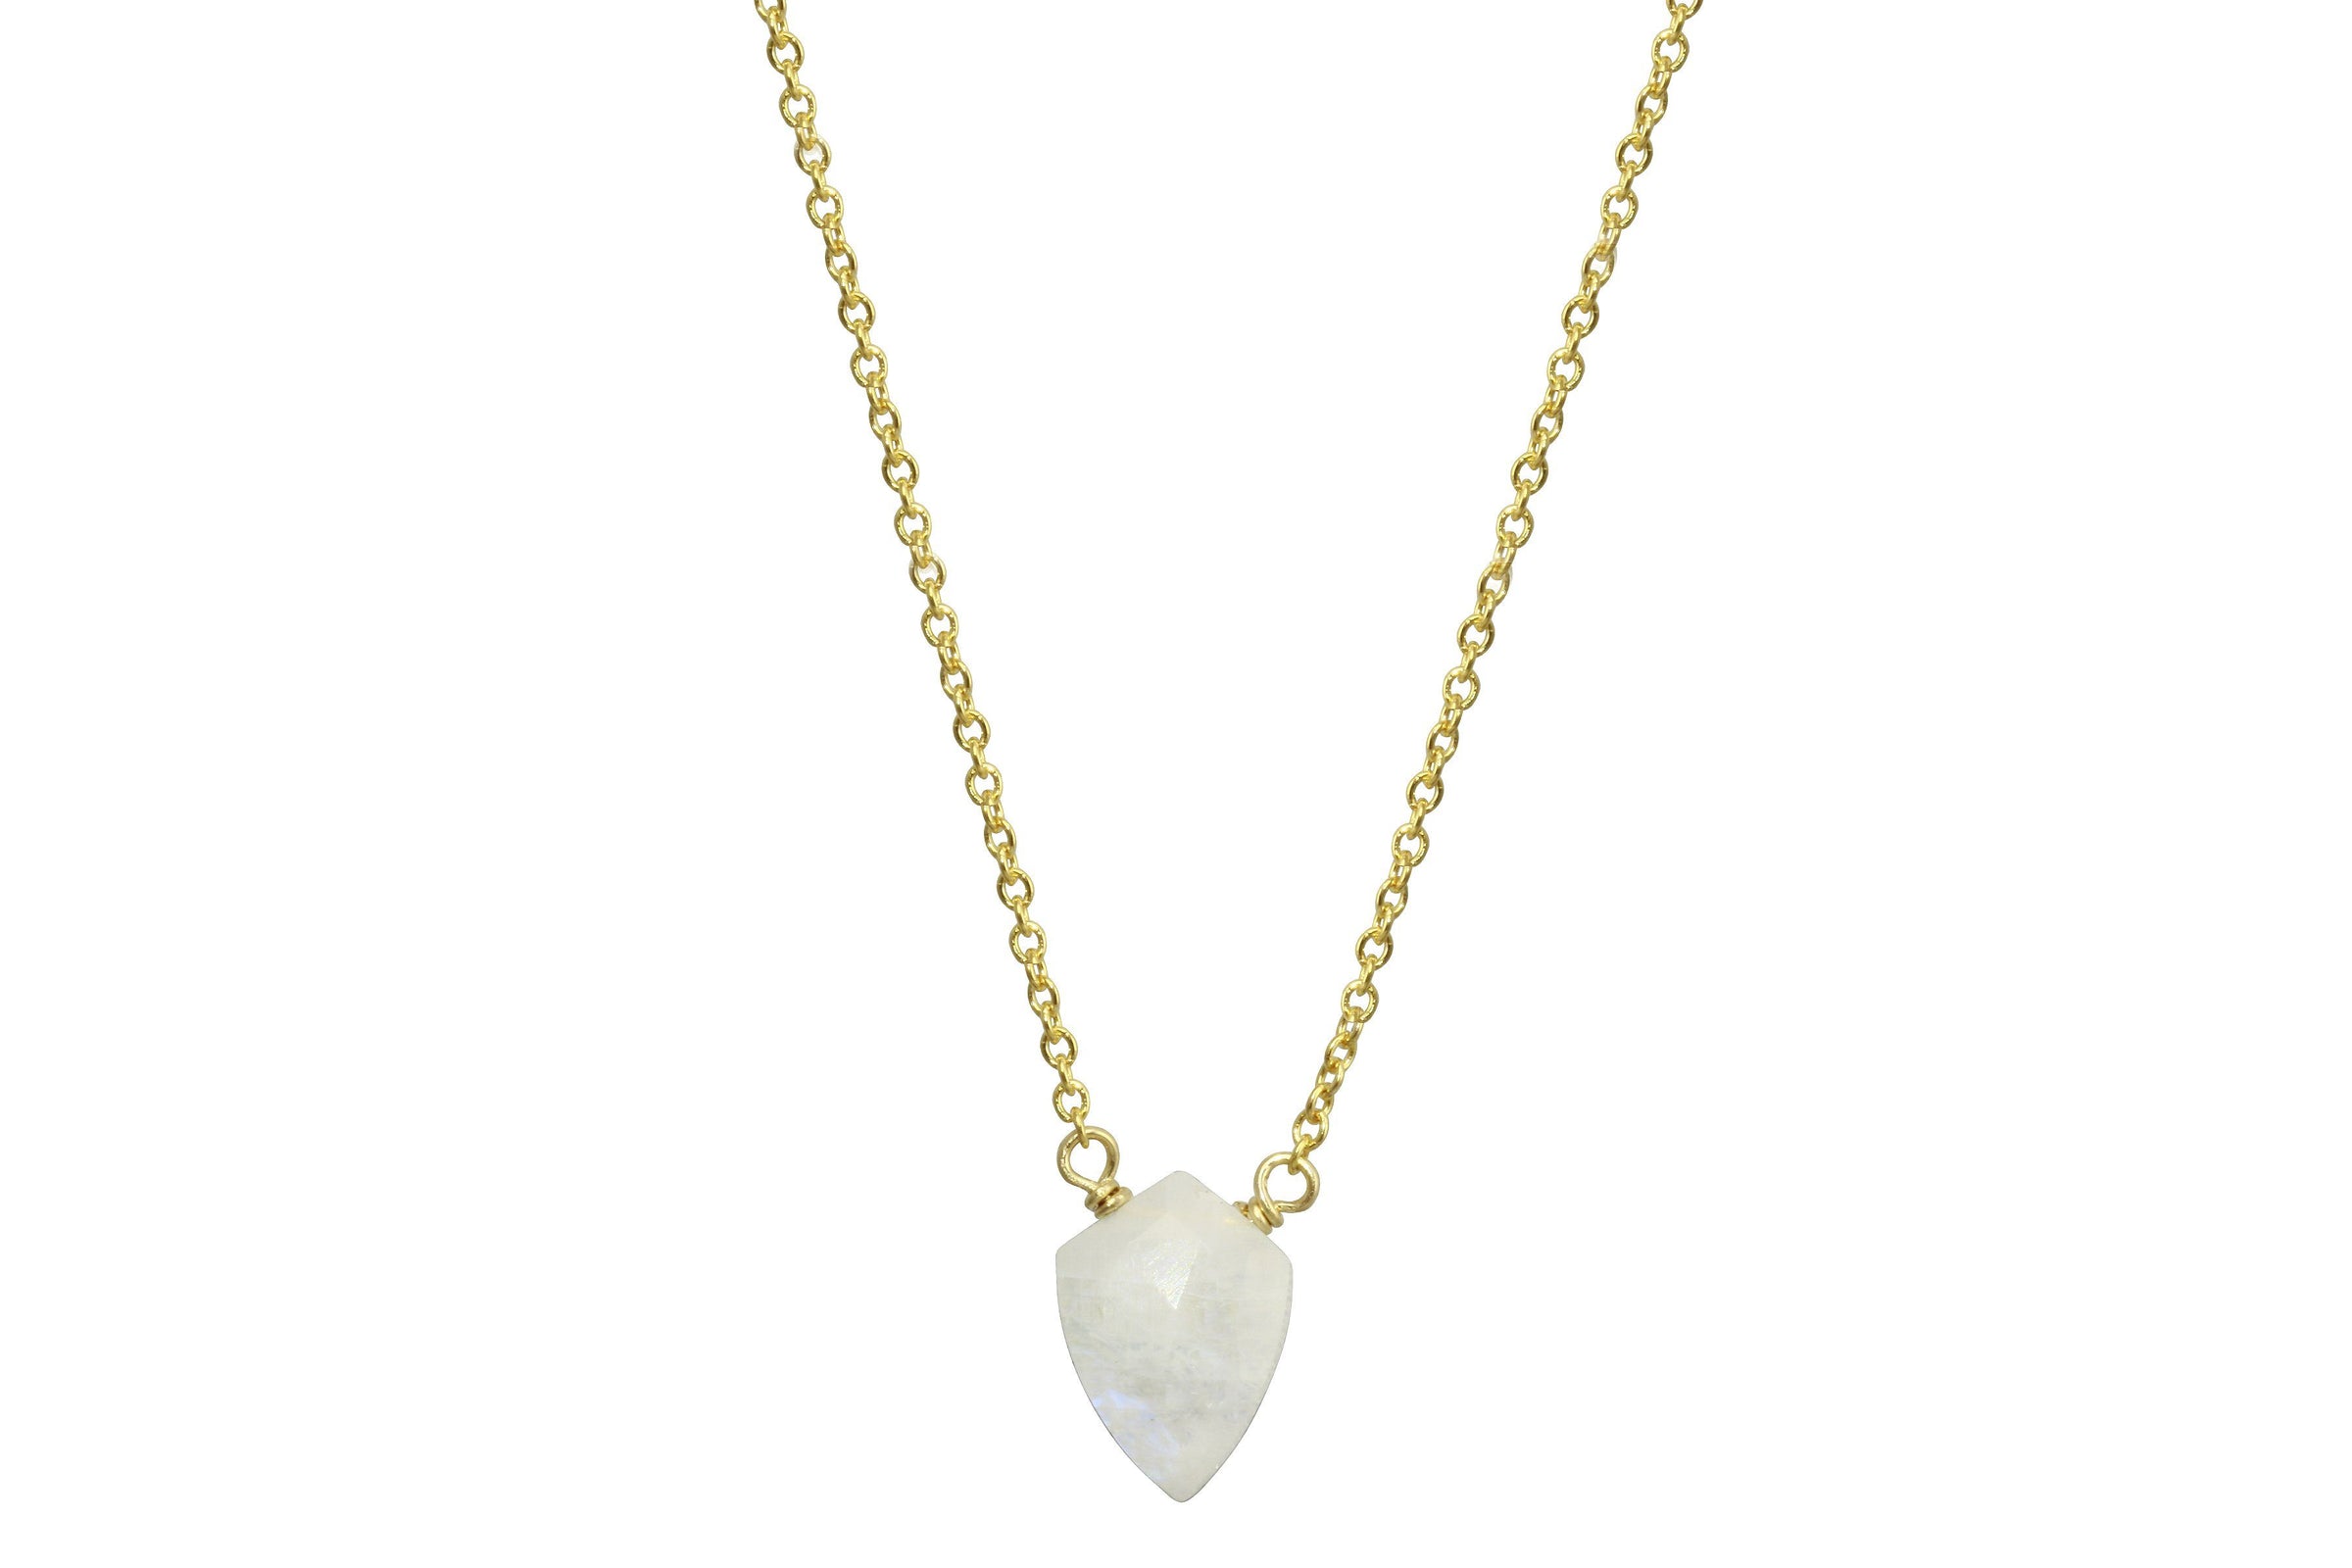 Rainbow moonstone little shield 14k yellow gold filled necklace - Little Rock collection necklace Amanda K Lockrow 